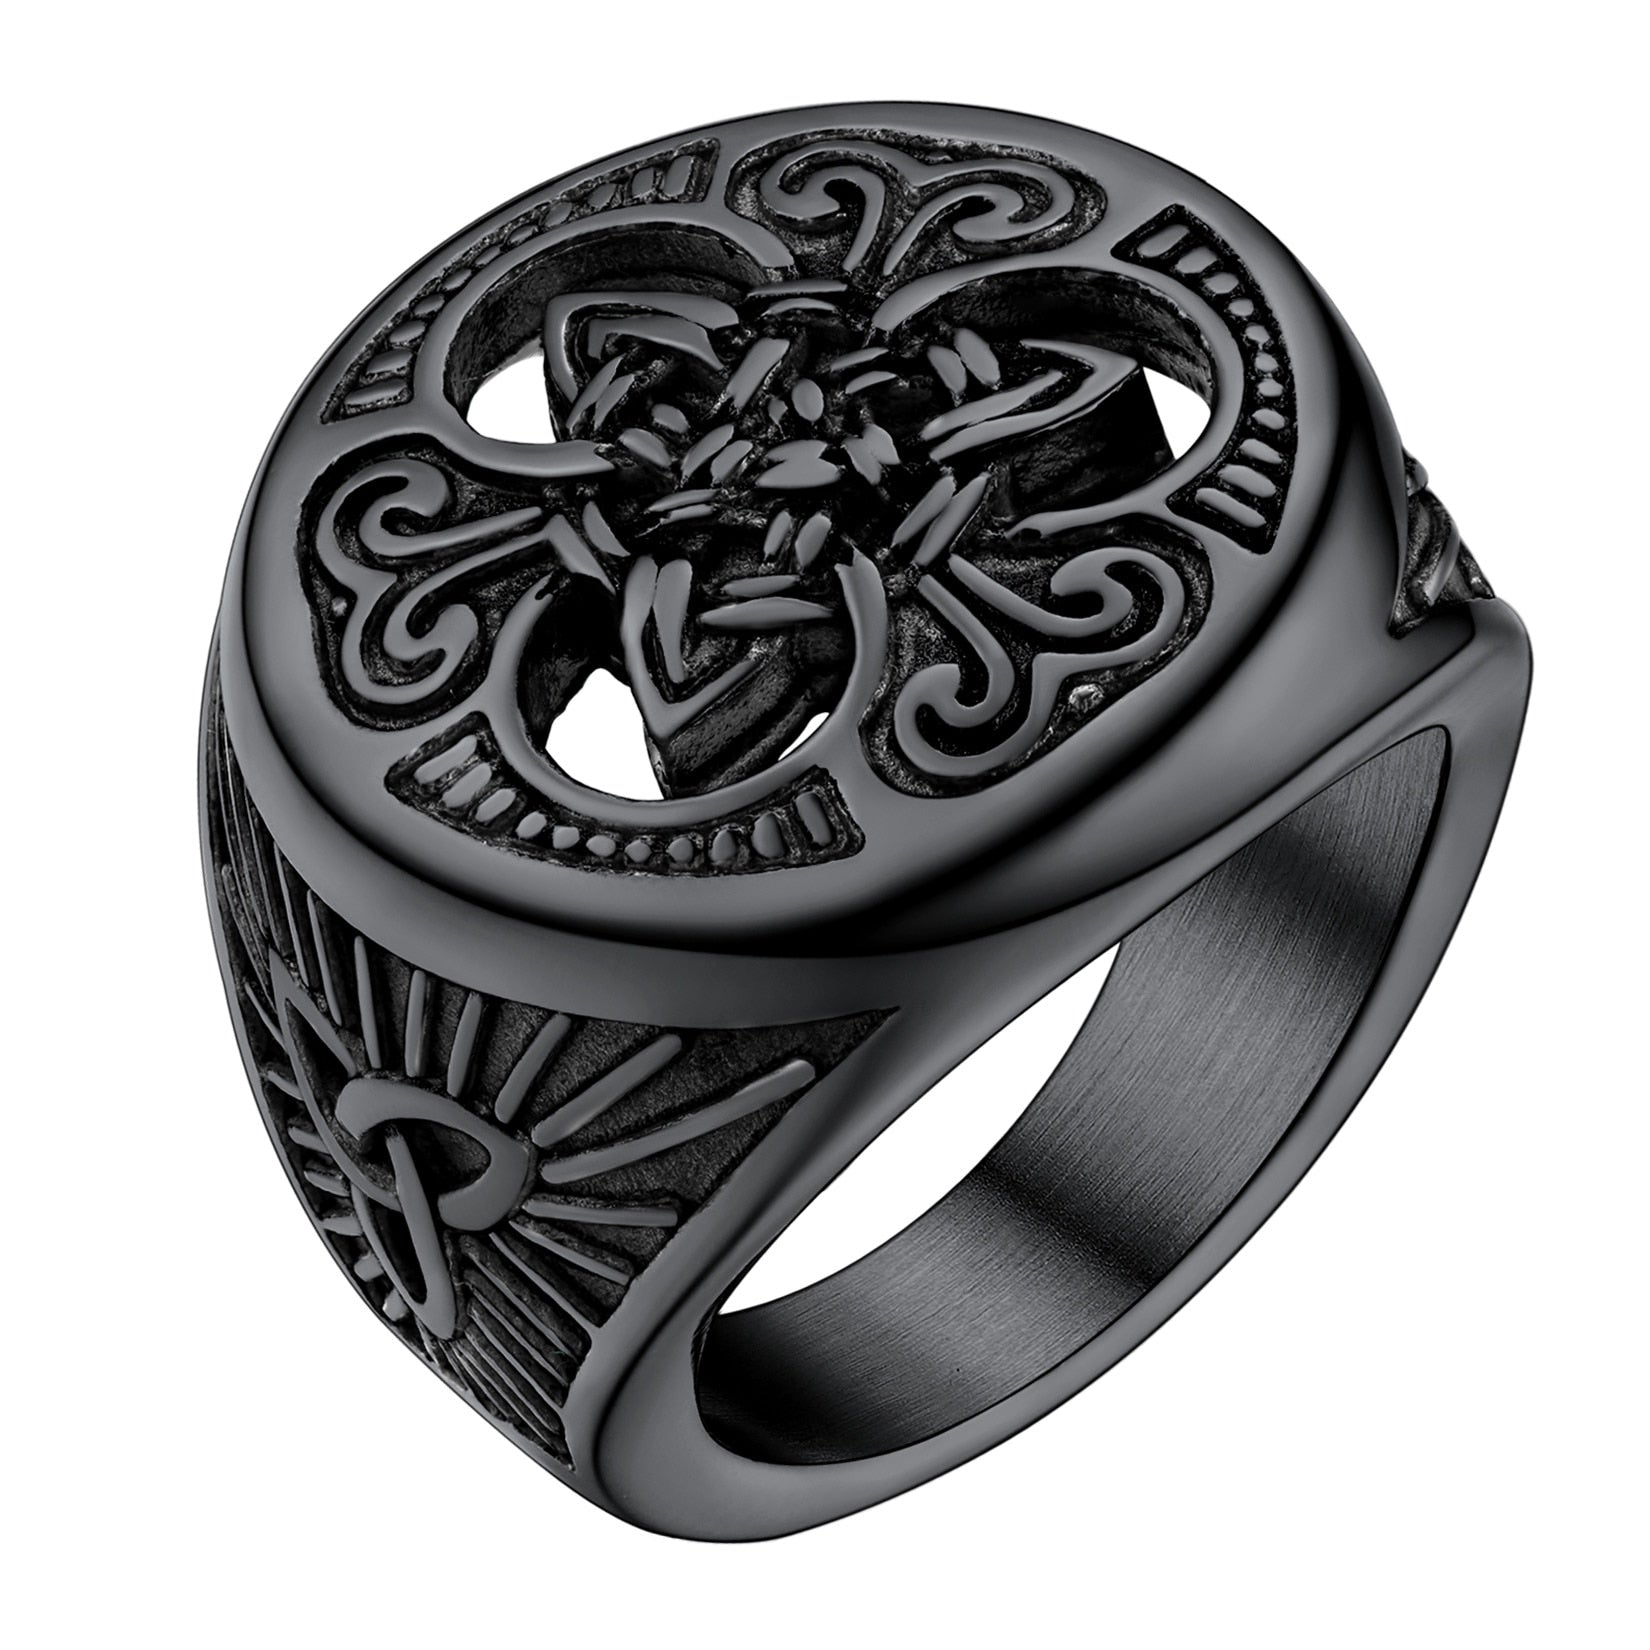 U7 Irish Celtic Knot Ring Antique Black Stainless Steel Triquetra Signet for Men Hip Hop Jewelry Size 7 to 12 R202 Green